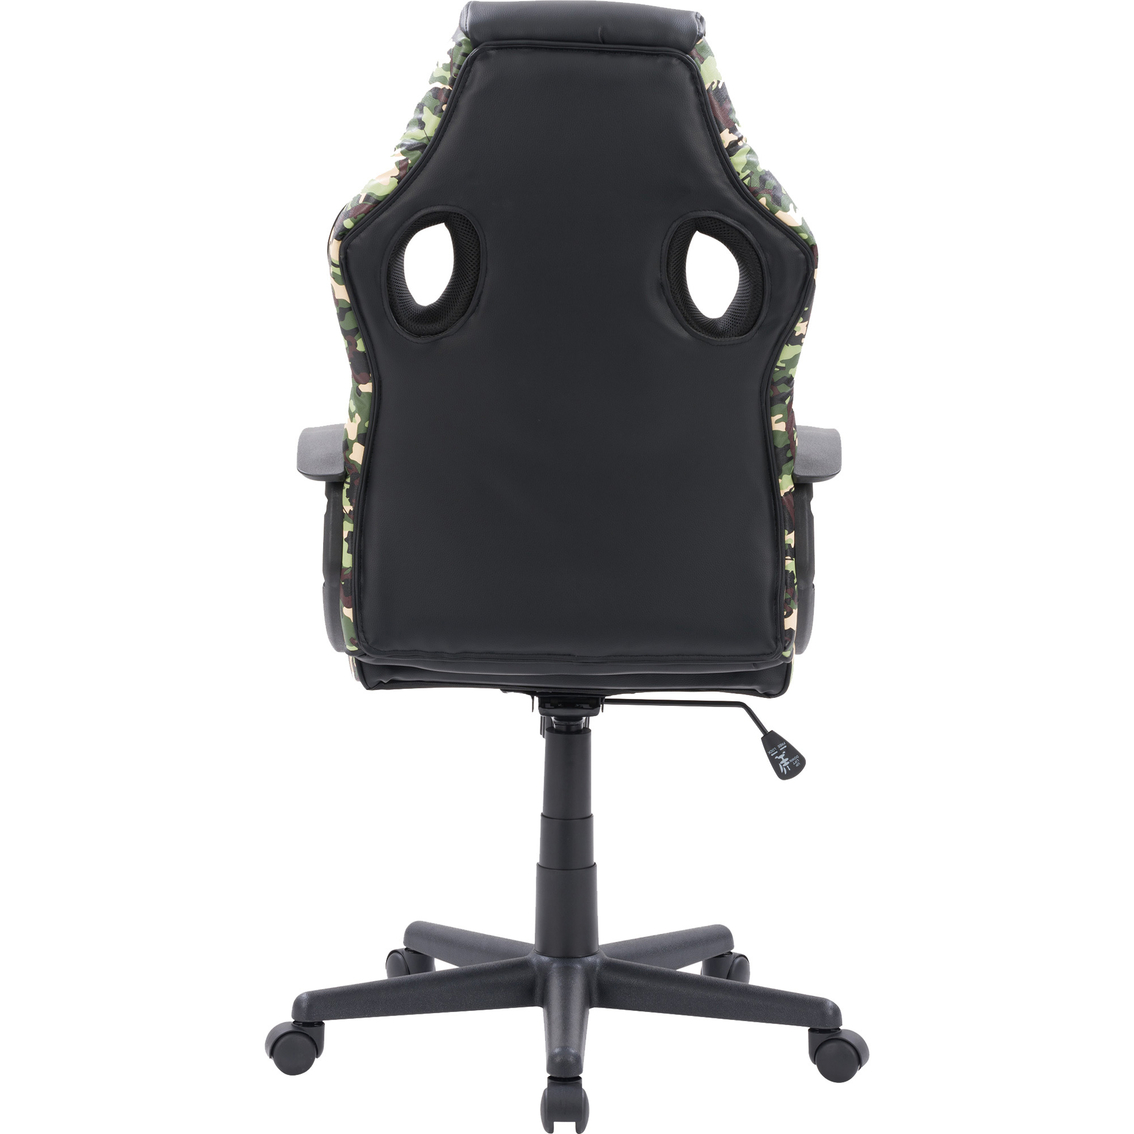 Corliving Mad Dog Black and Camo Gaming Chair - Image 2 of 5